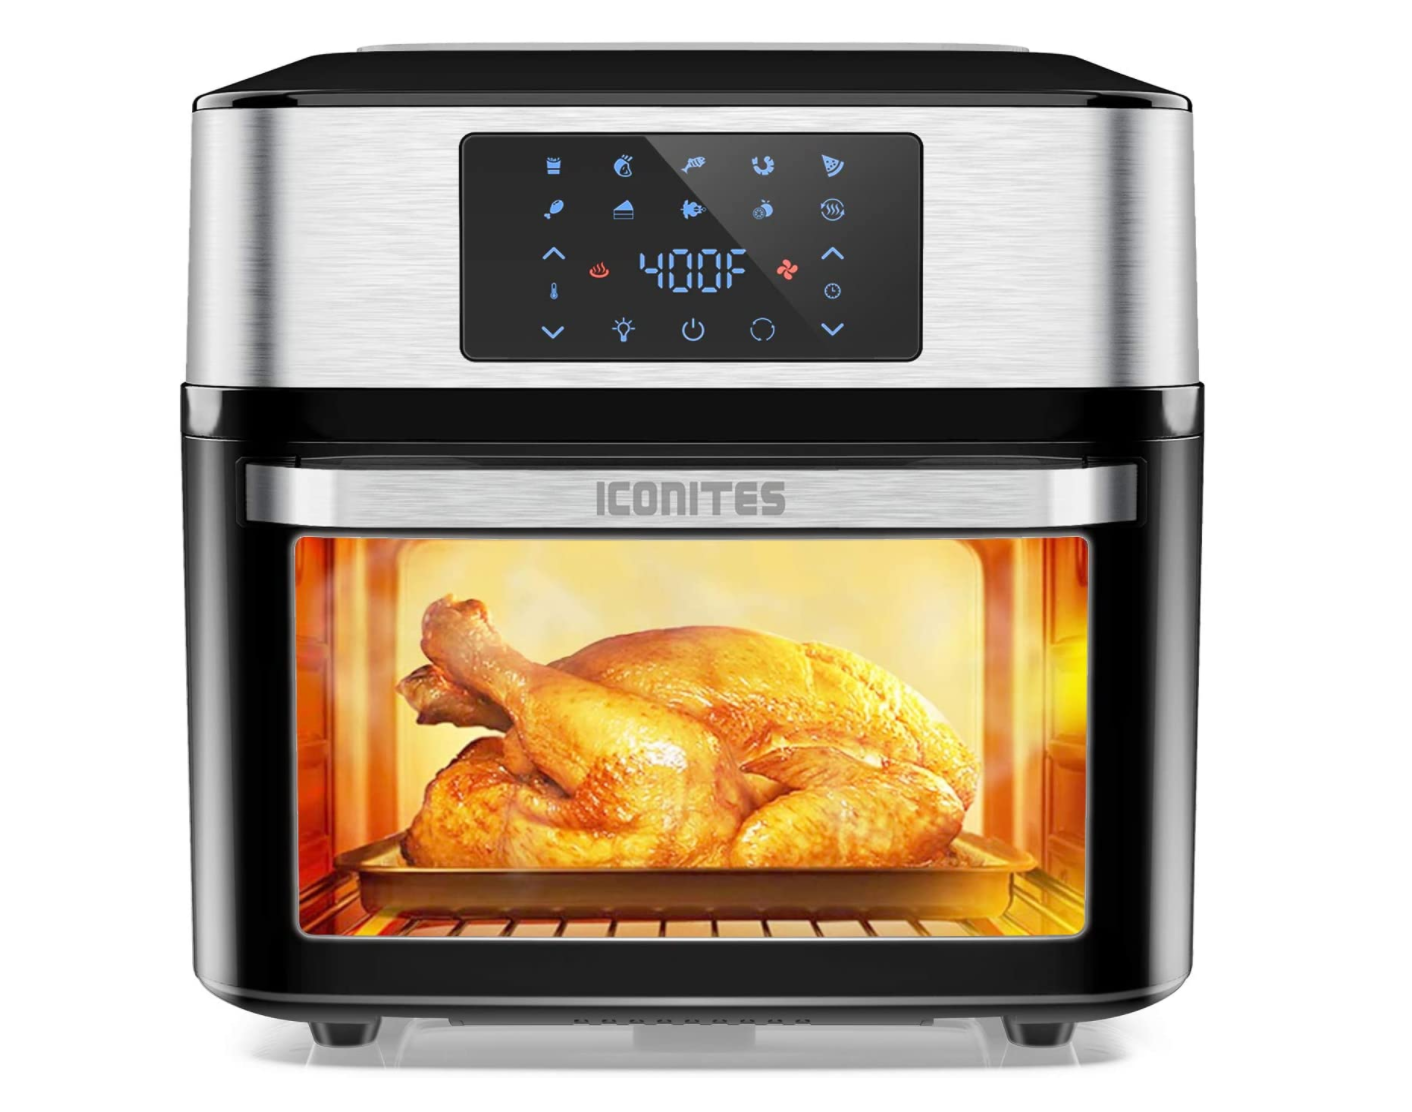 IVEENY 10-in-1 Air Fryer Oven, 20 Quart Airfryer Toaster Oven Combo Review